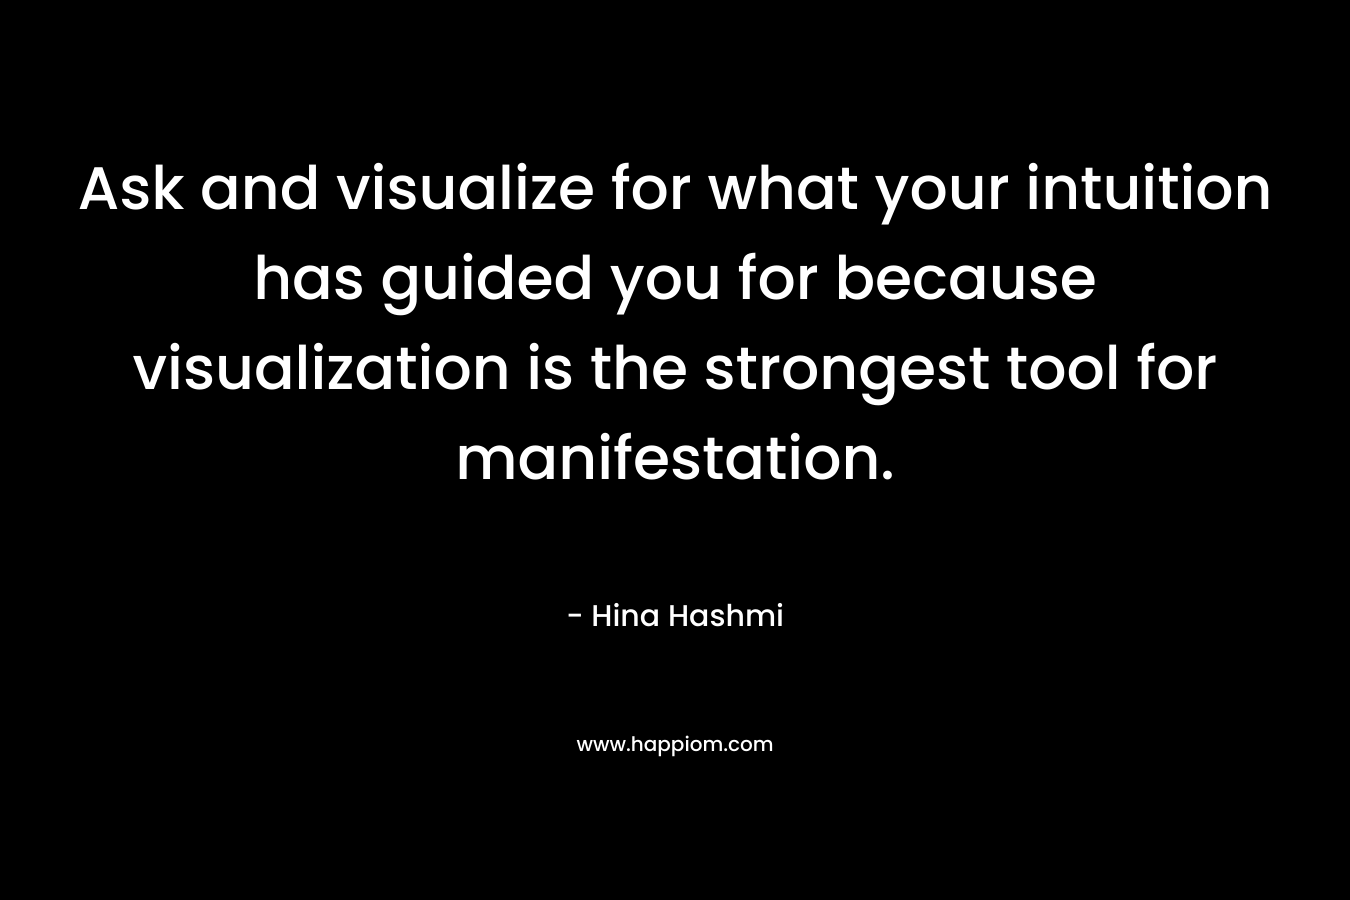 Ask and visualize for what your intuition has guided you for because visualization is the strongest tool for manifestation.